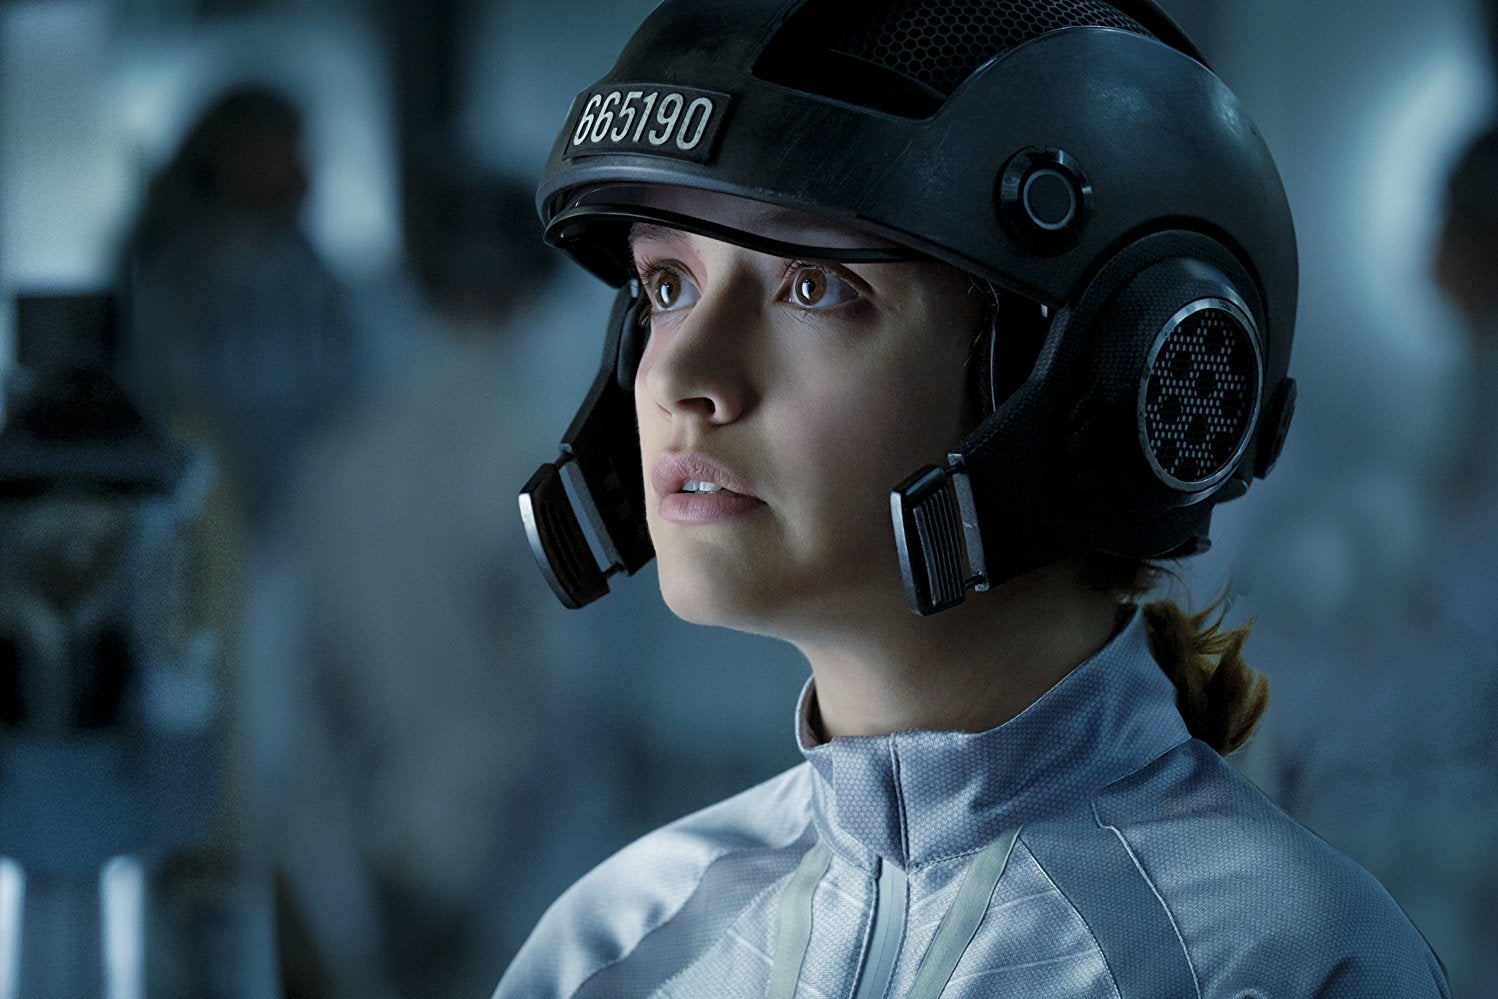 Olivia Cooke as Art3mis in Ready Player One.